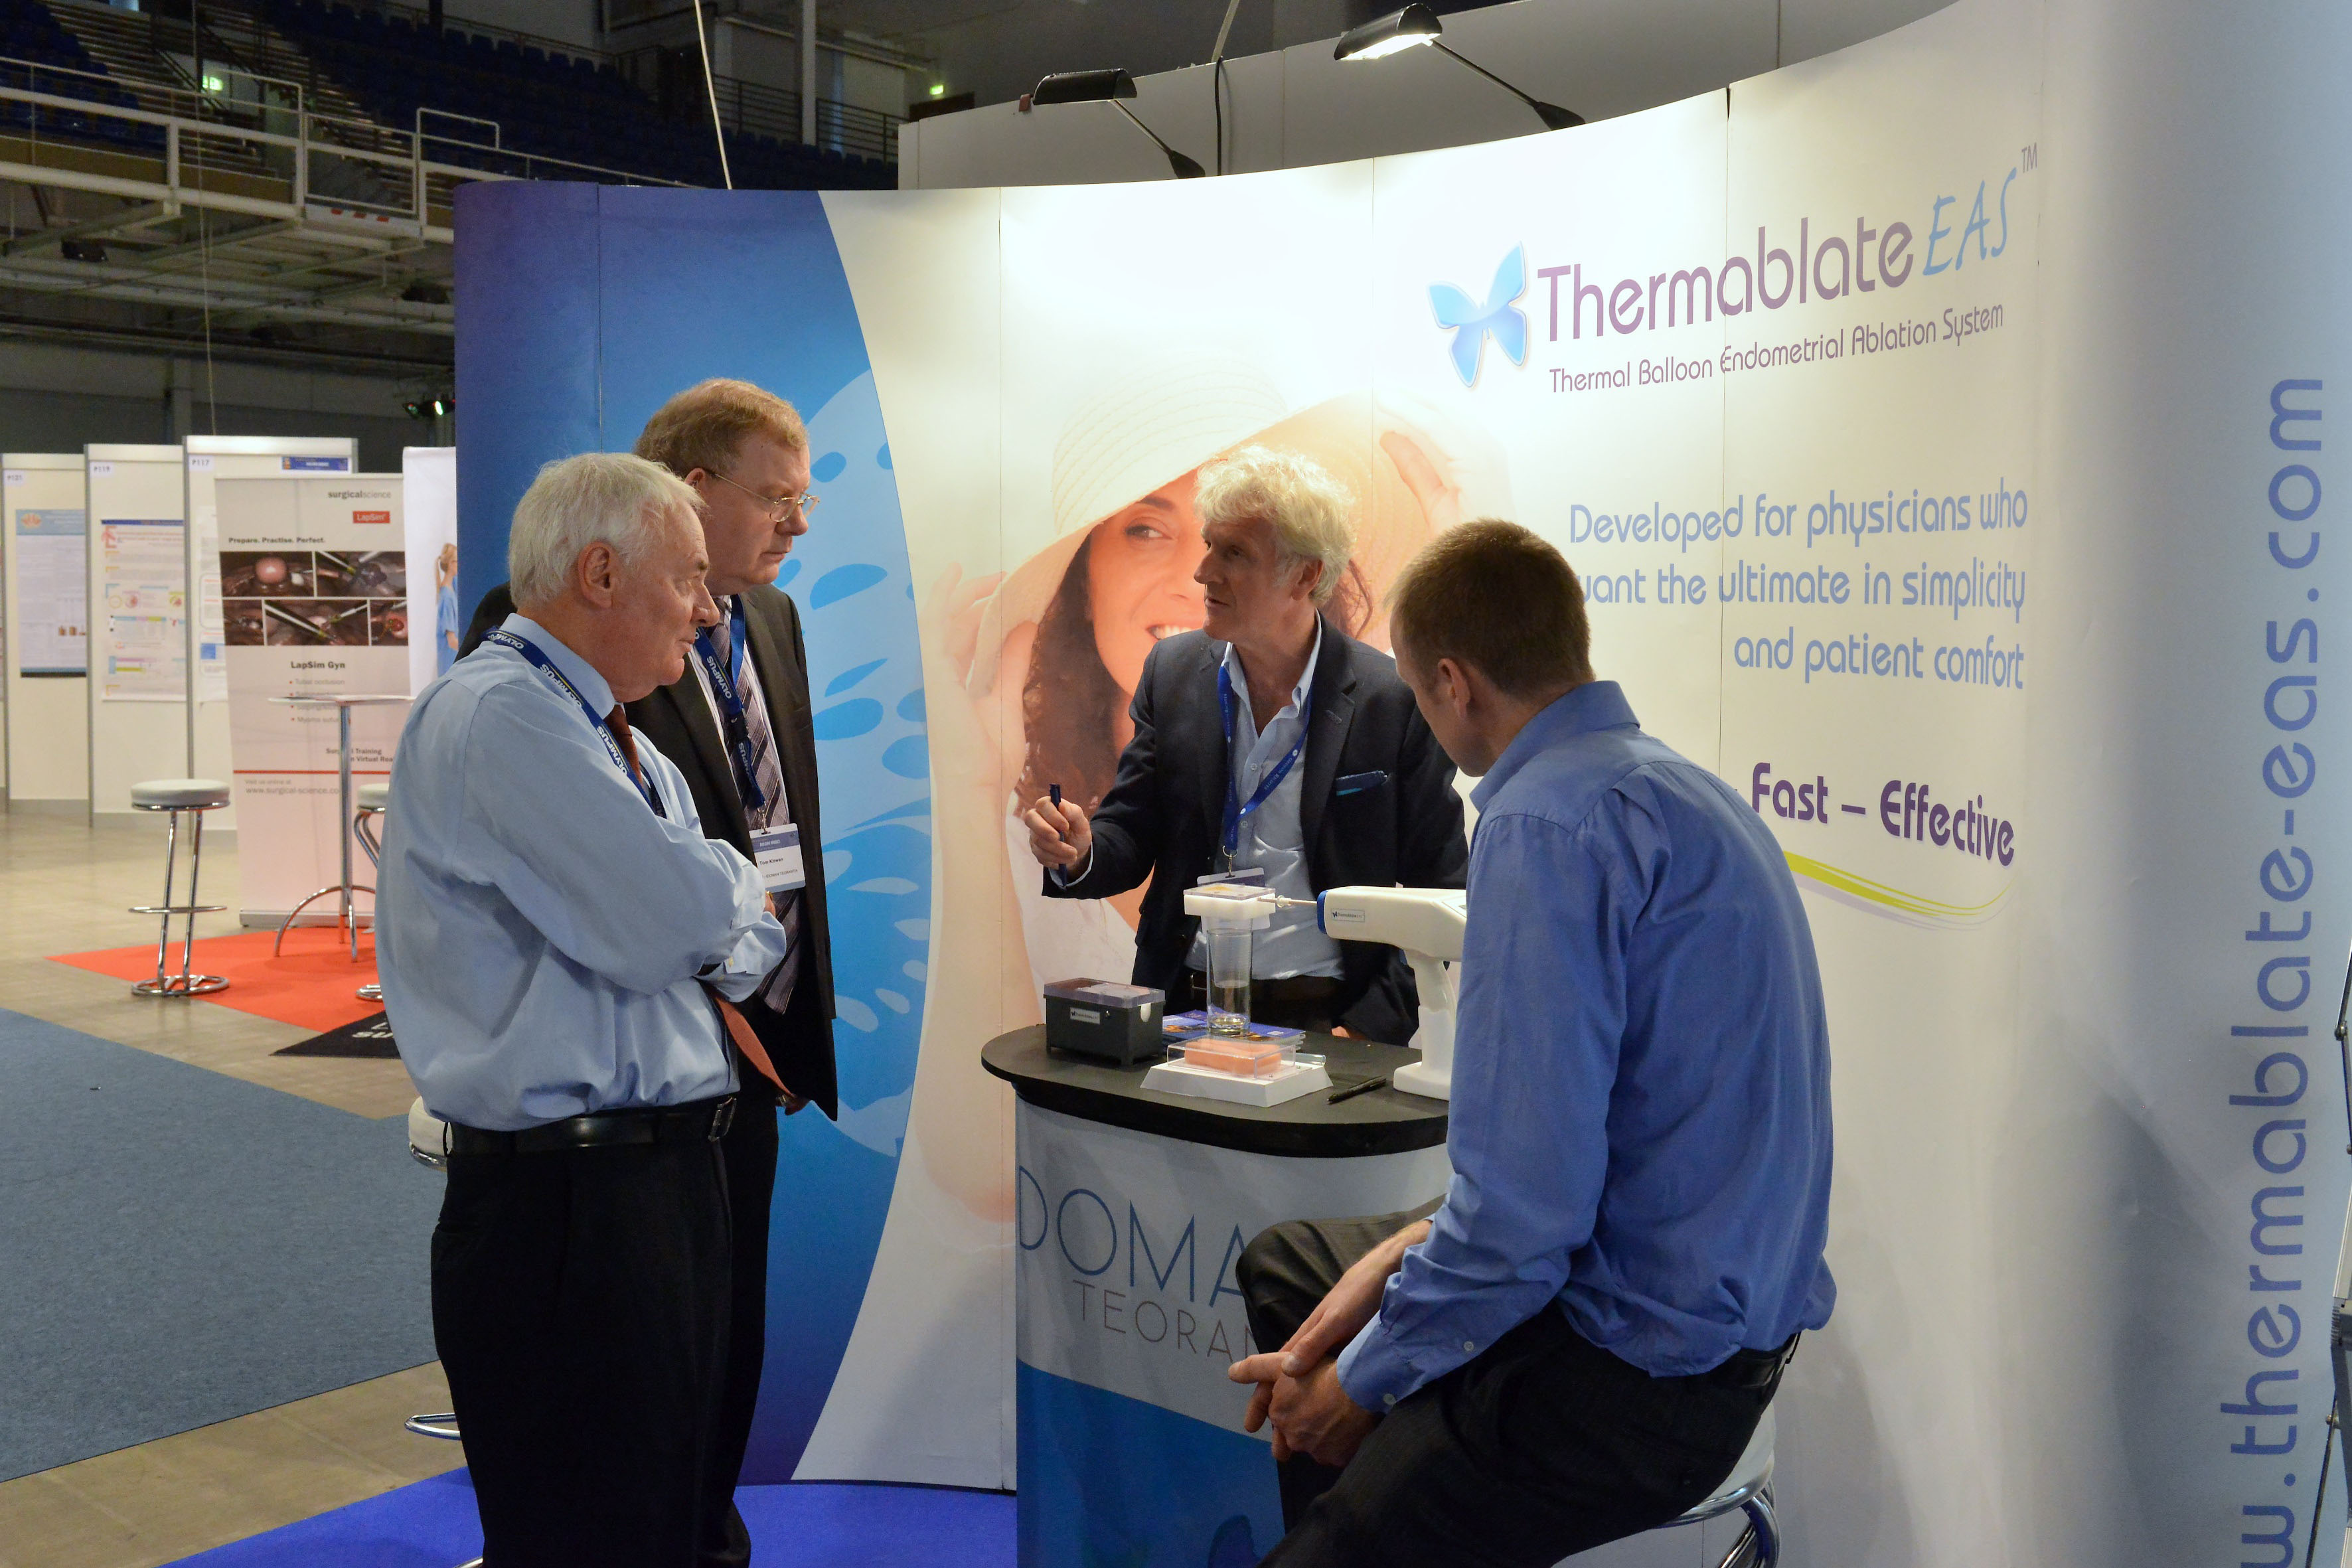 Budapest thermablate stand / ESGE congress 2015